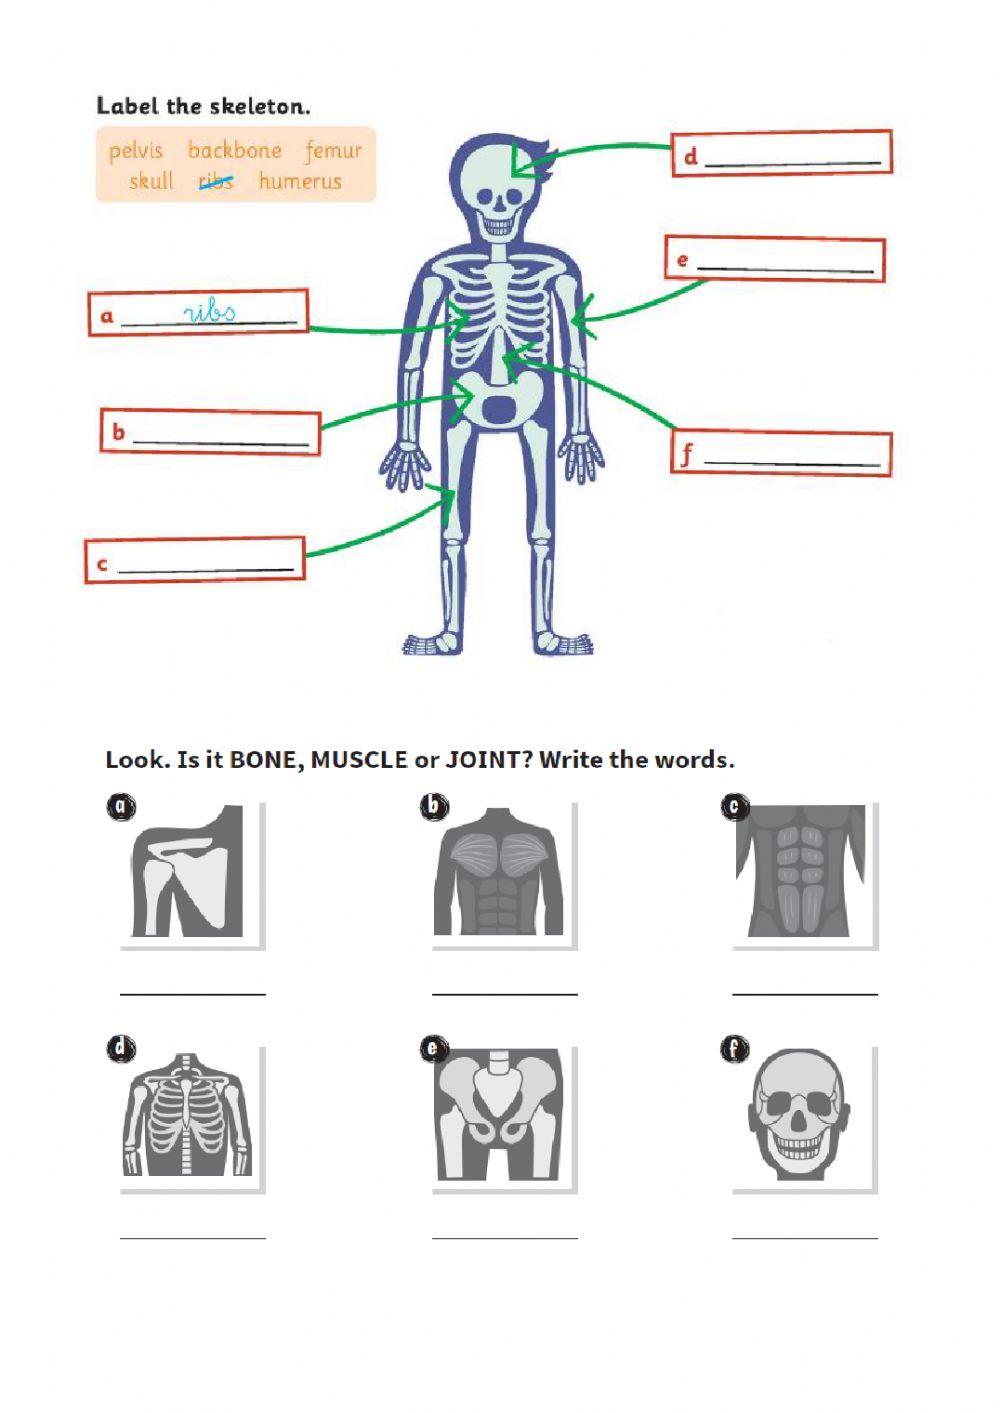 BONES, MUSCLES AND JOINTS REVIEW